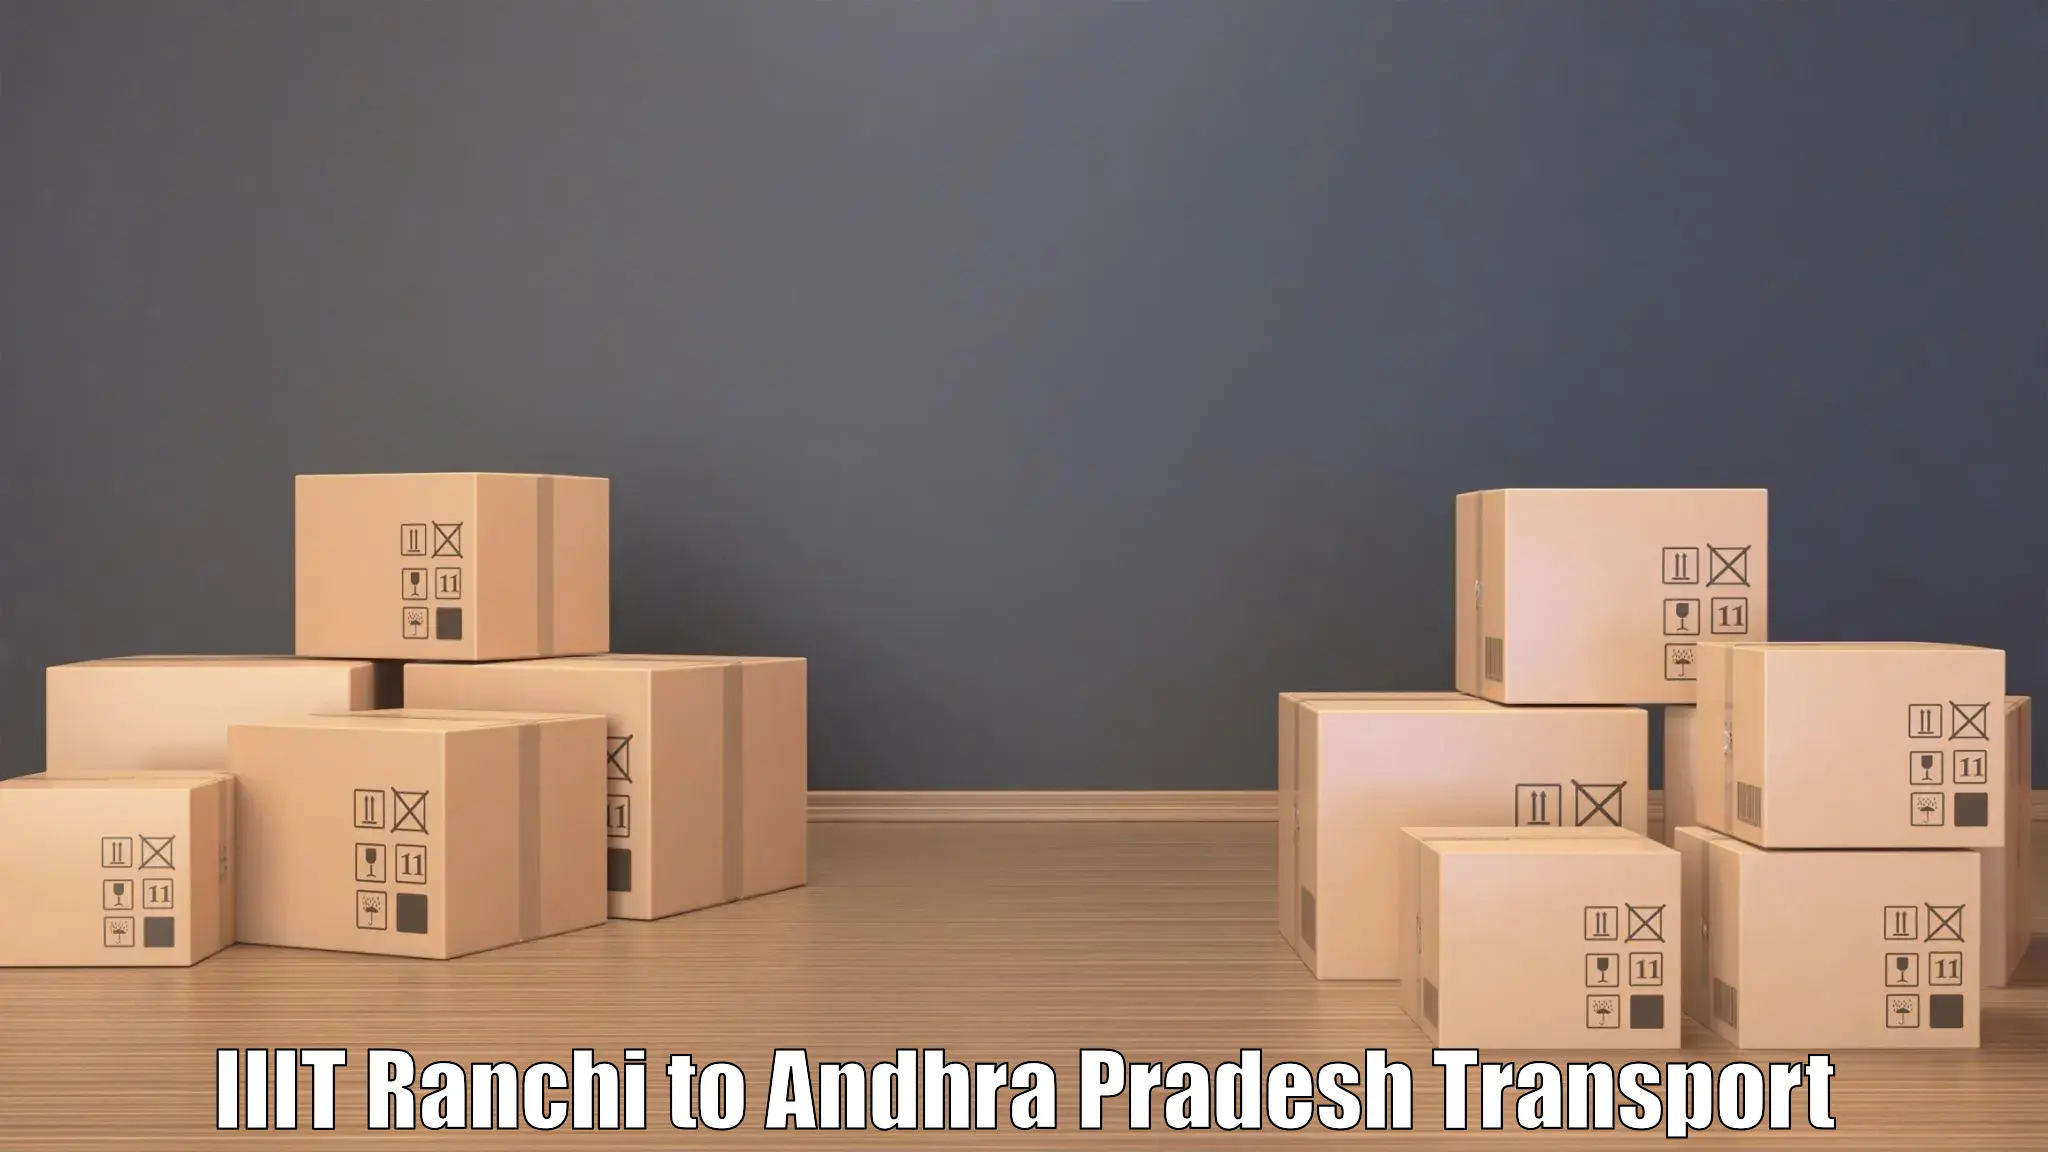 Part load transport service in India IIIT Ranchi to Andhra Pradesh